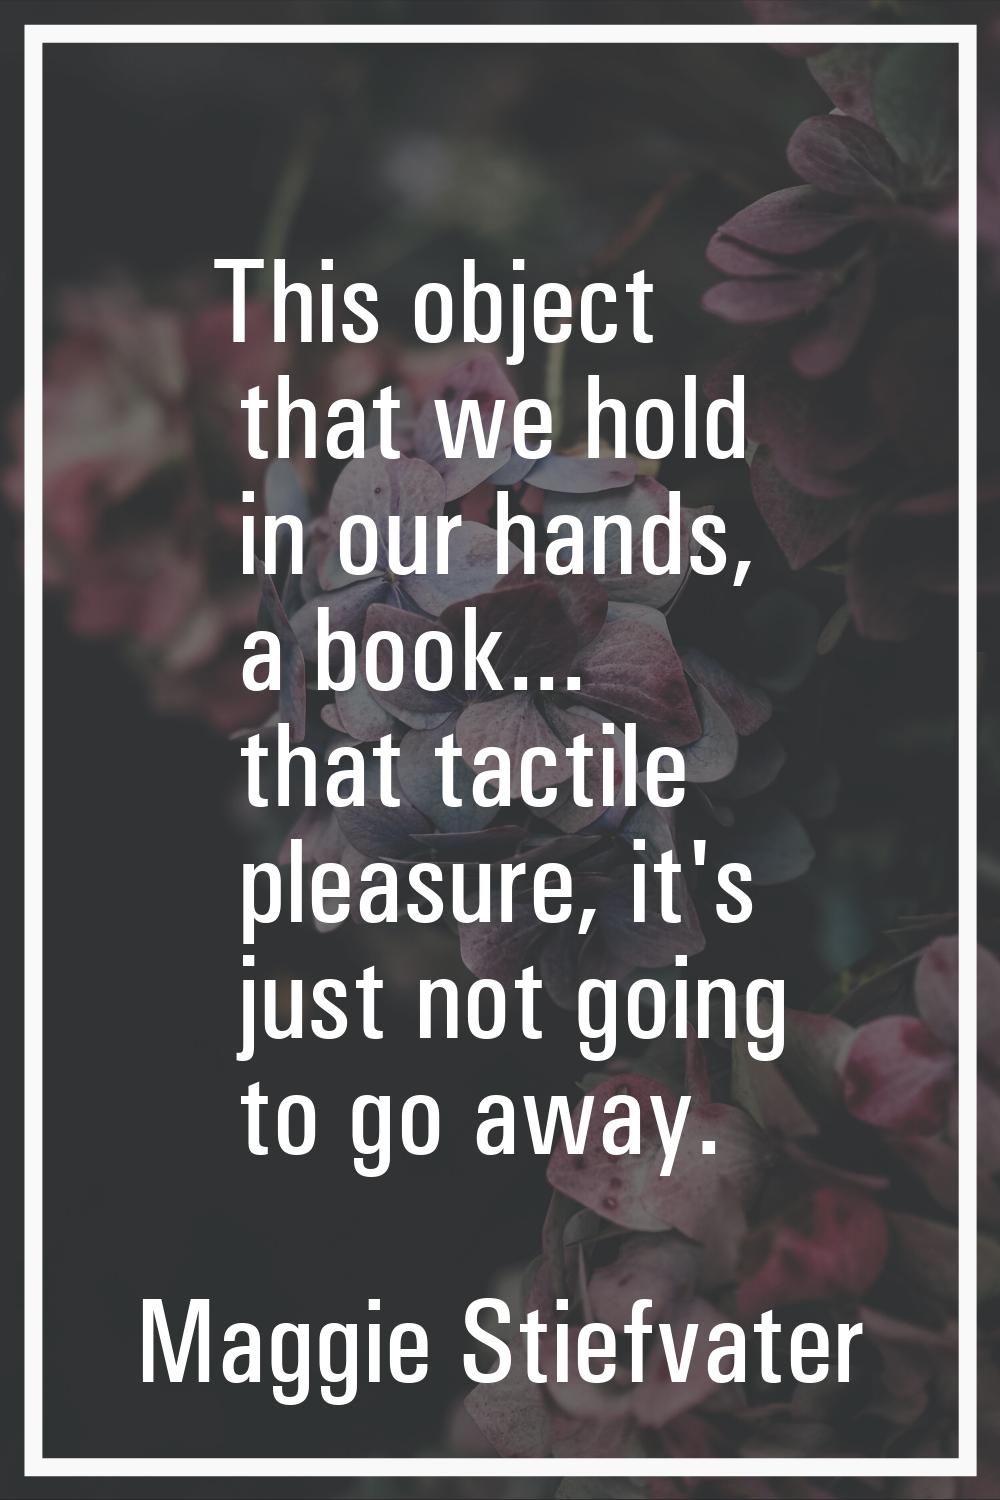 This object that we hold in our hands, a book... that tactile pleasure, it's just not going to go a